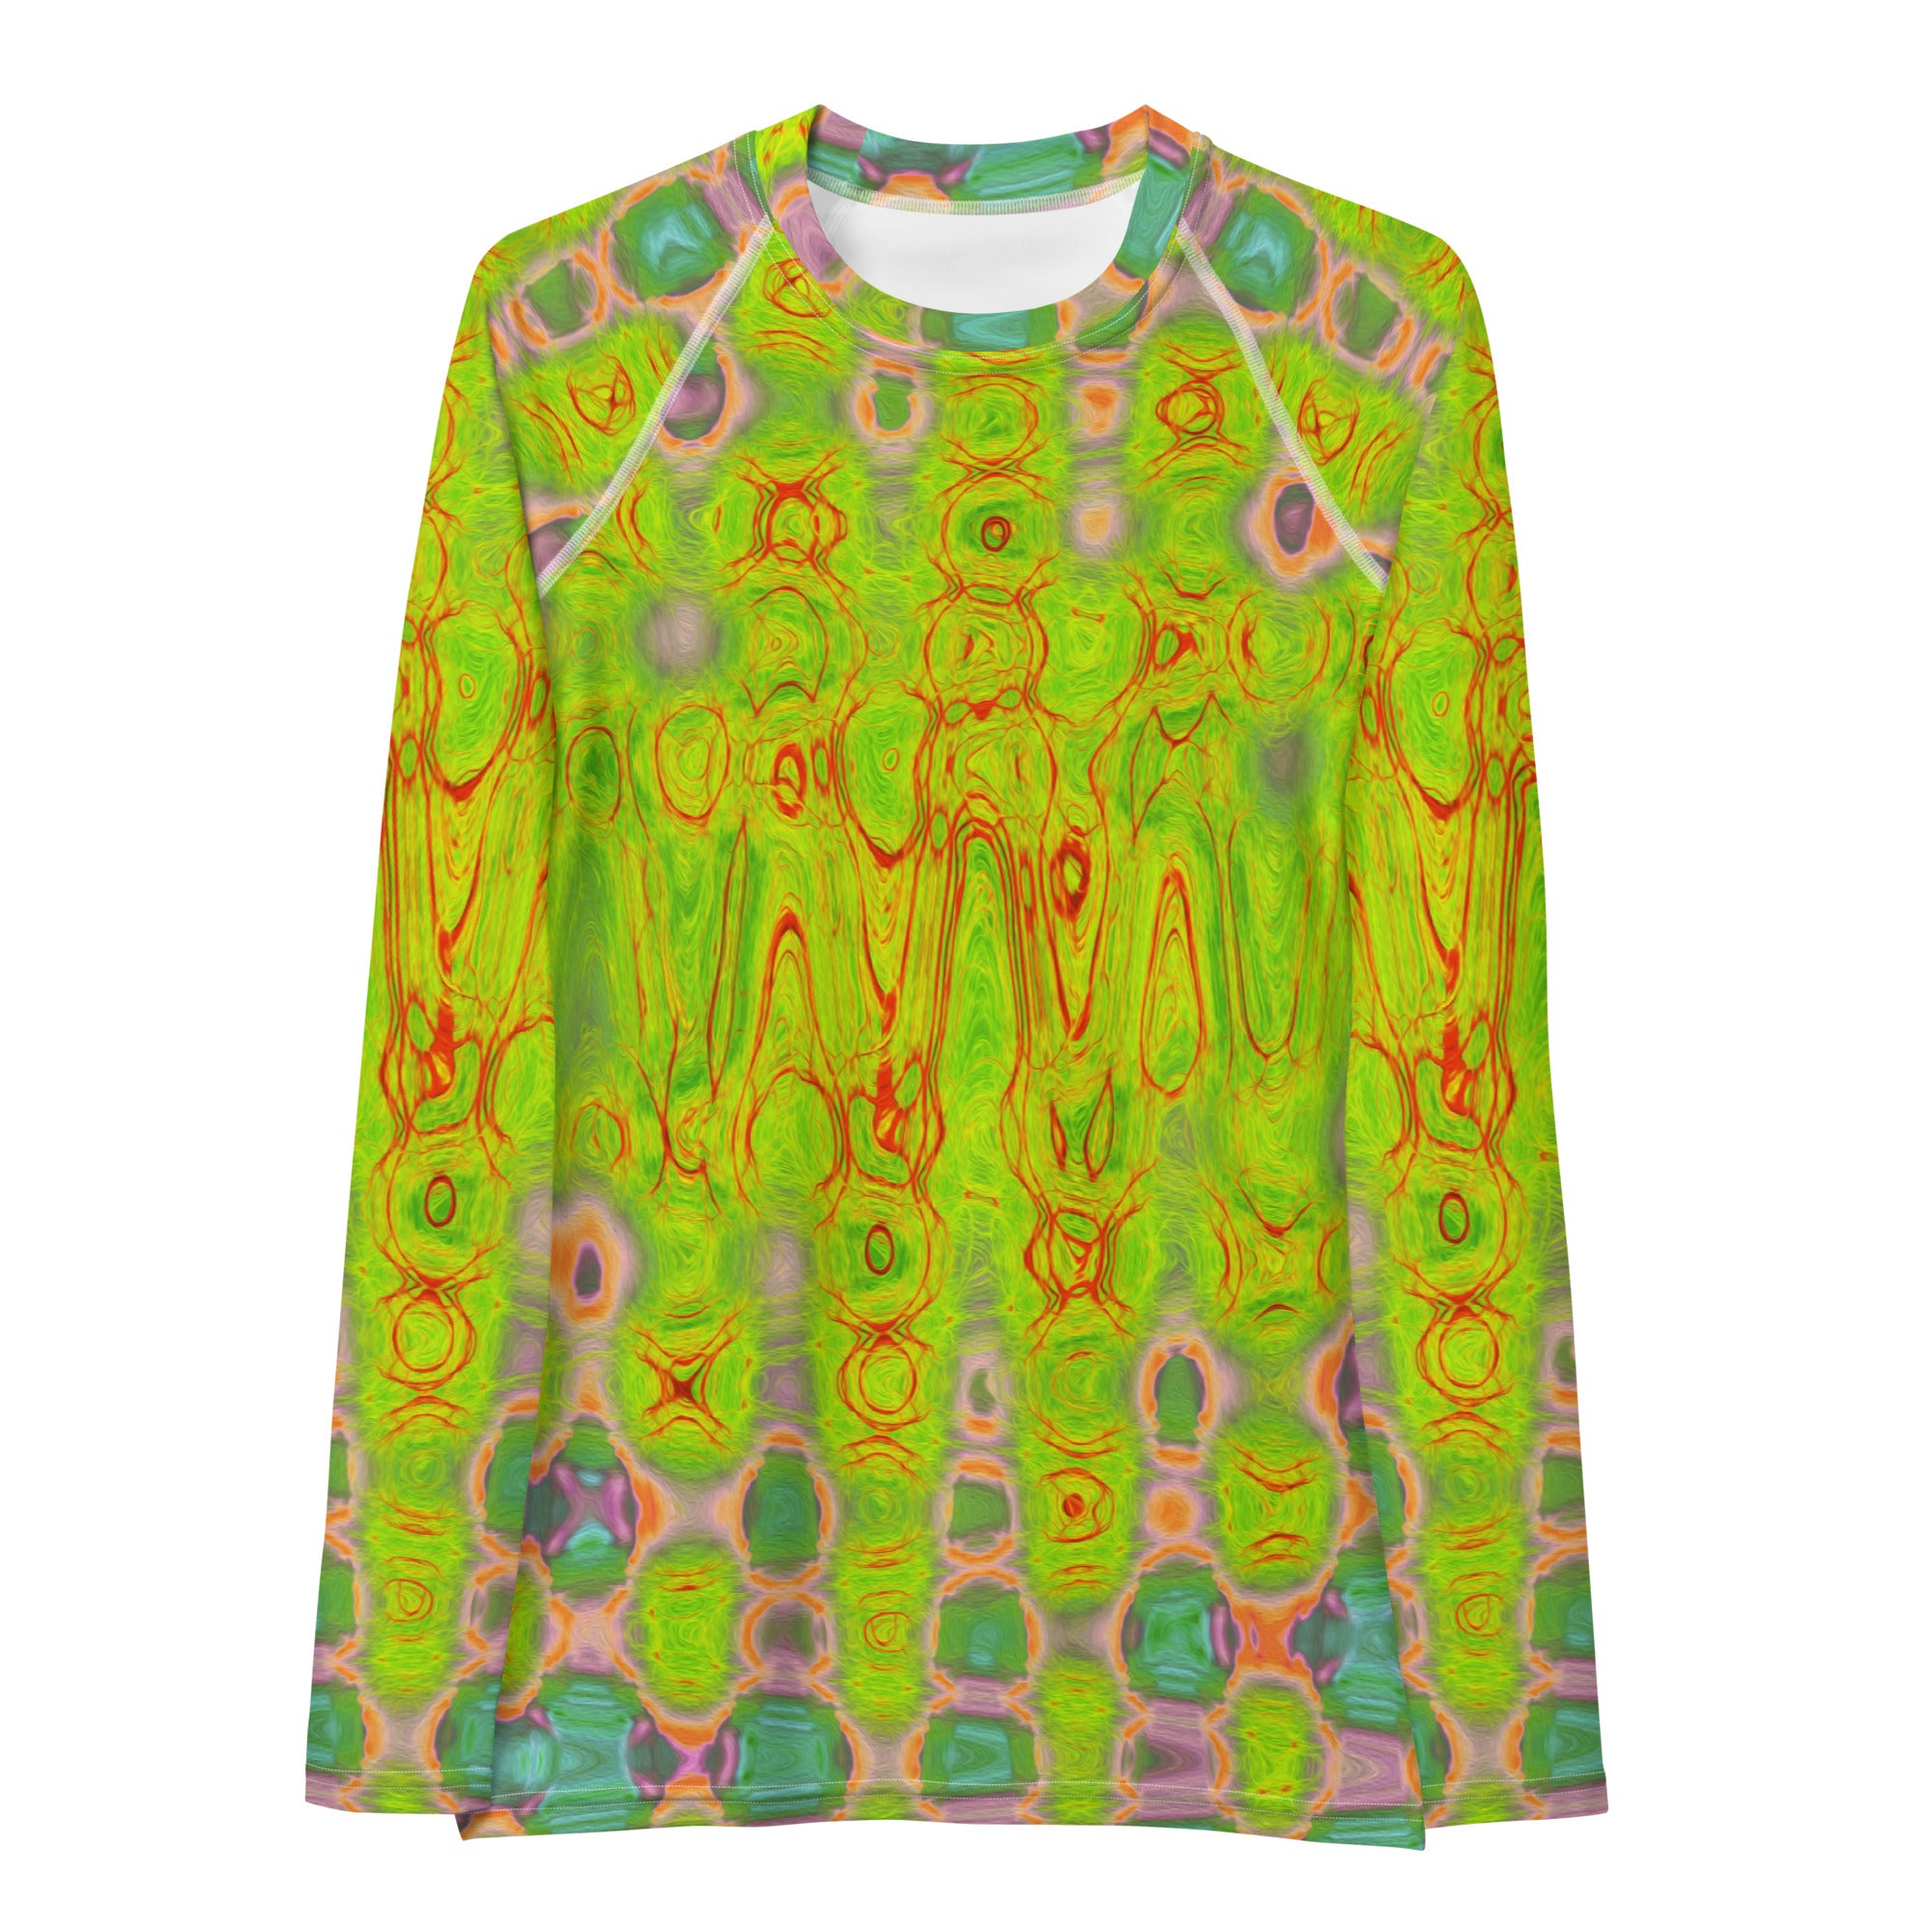 Women's Rash Guard Shirts - Abstract Yellow and Red Wavy Tie Dye Clouds